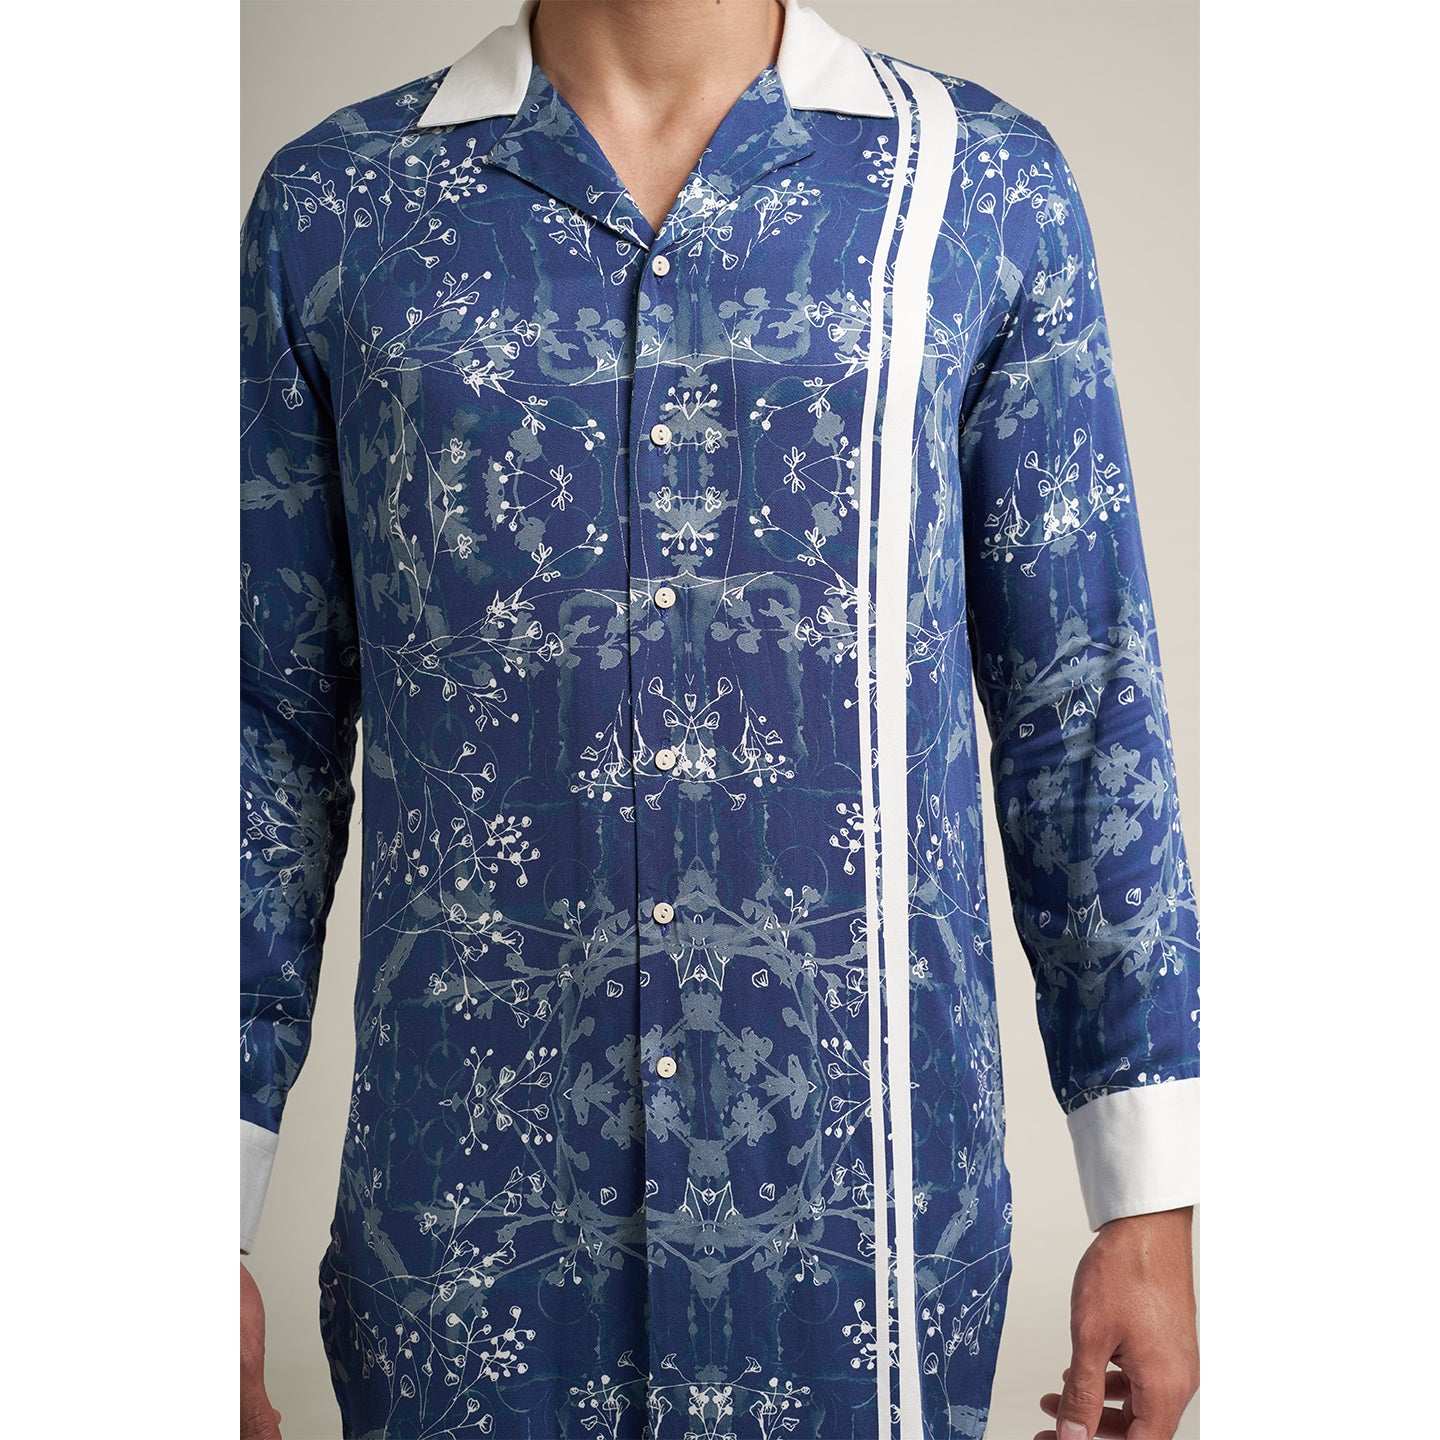 A long cuban collar shirt printed in blue and white made from organic lotus stem fabric white solid cuff and collar in white. the shirt has a comfort fit and it falls at mid thing